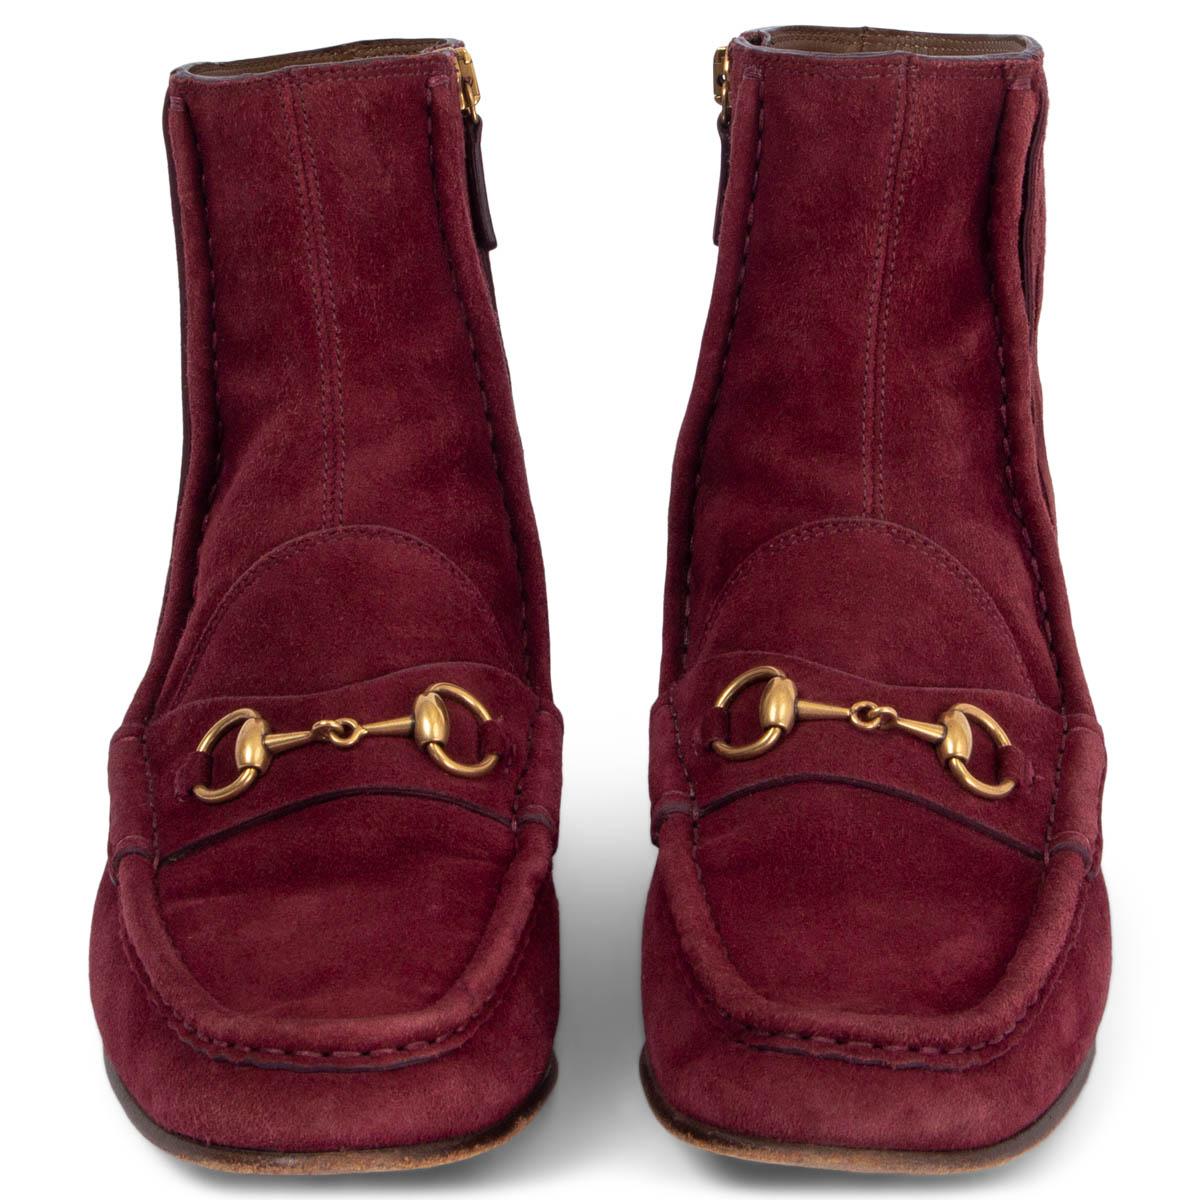 100% authentic Gucci 2014 fringed horsebit ankle boots in burgundy suede featuring antique gold-tone hardware. Open with a zipper on the inside. Have been worn and are in excellent condition. 

Measurements
Imprinted Size	37.5
Shoe Size	37.5
Inside